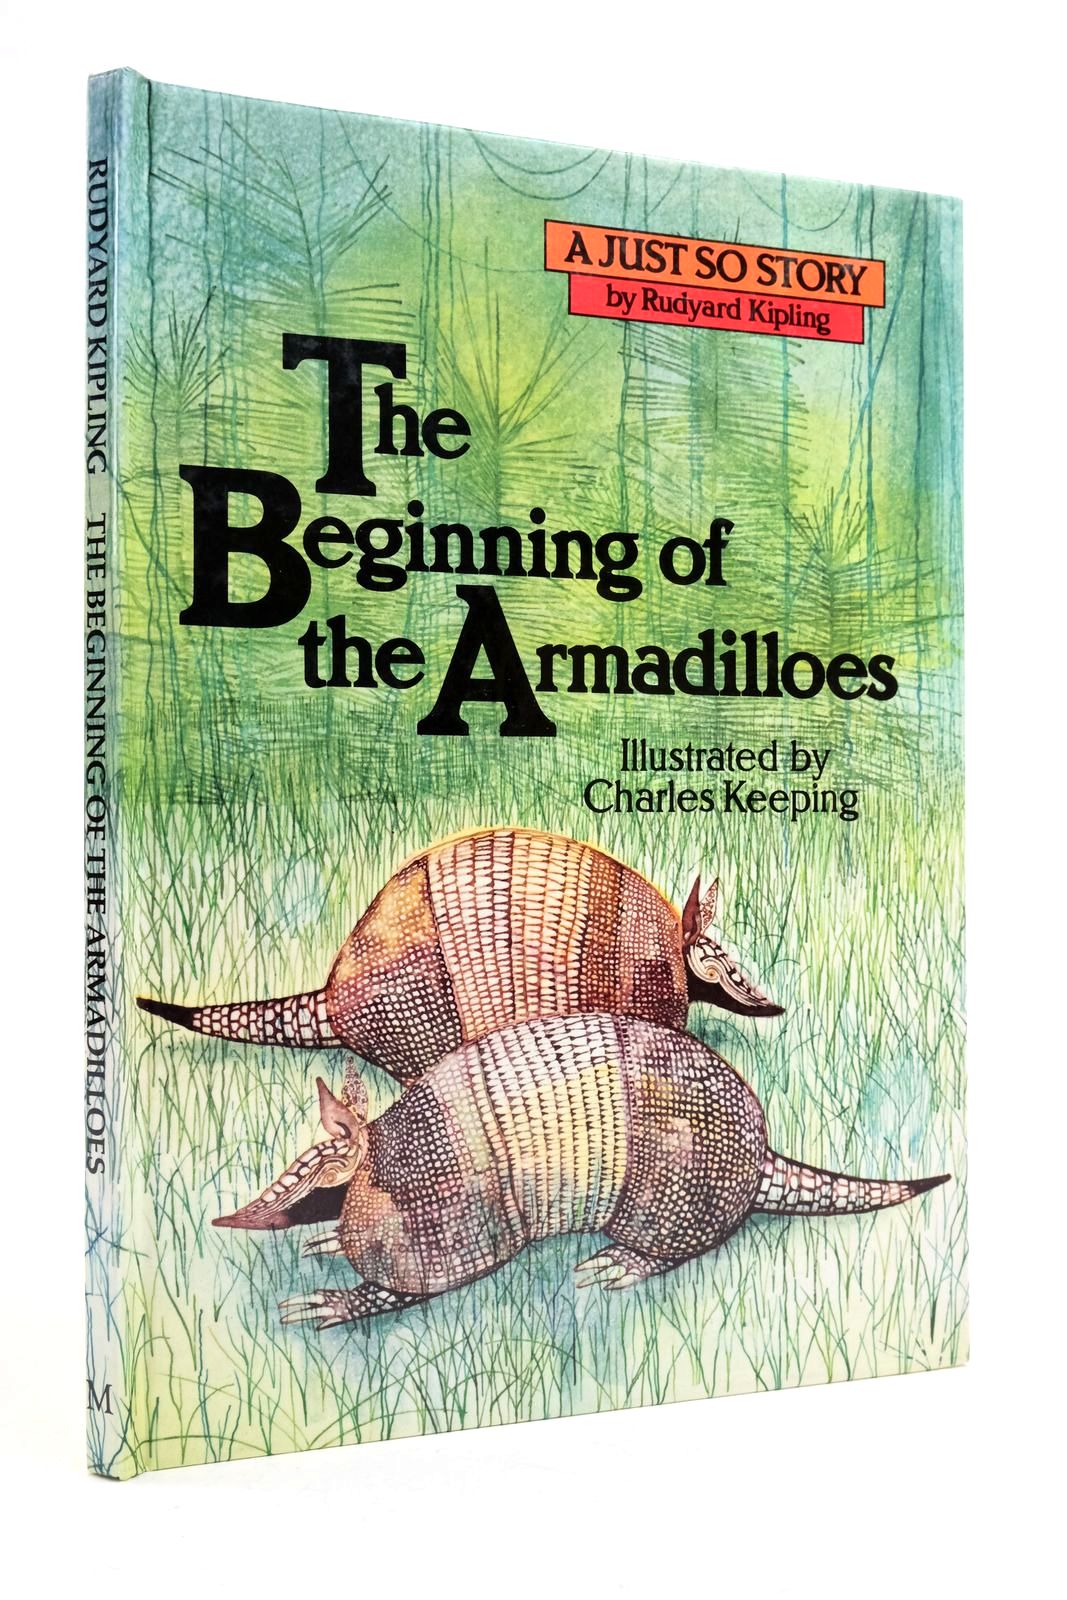 Photo of THE BEGINNING OF THE ARMADILLOES written by Kipling, Rudyard illustrated by Keeping, Charles published by Macmillan Children's Books (STOCK CODE: 2138614)  for sale by Stella & Rose's Books